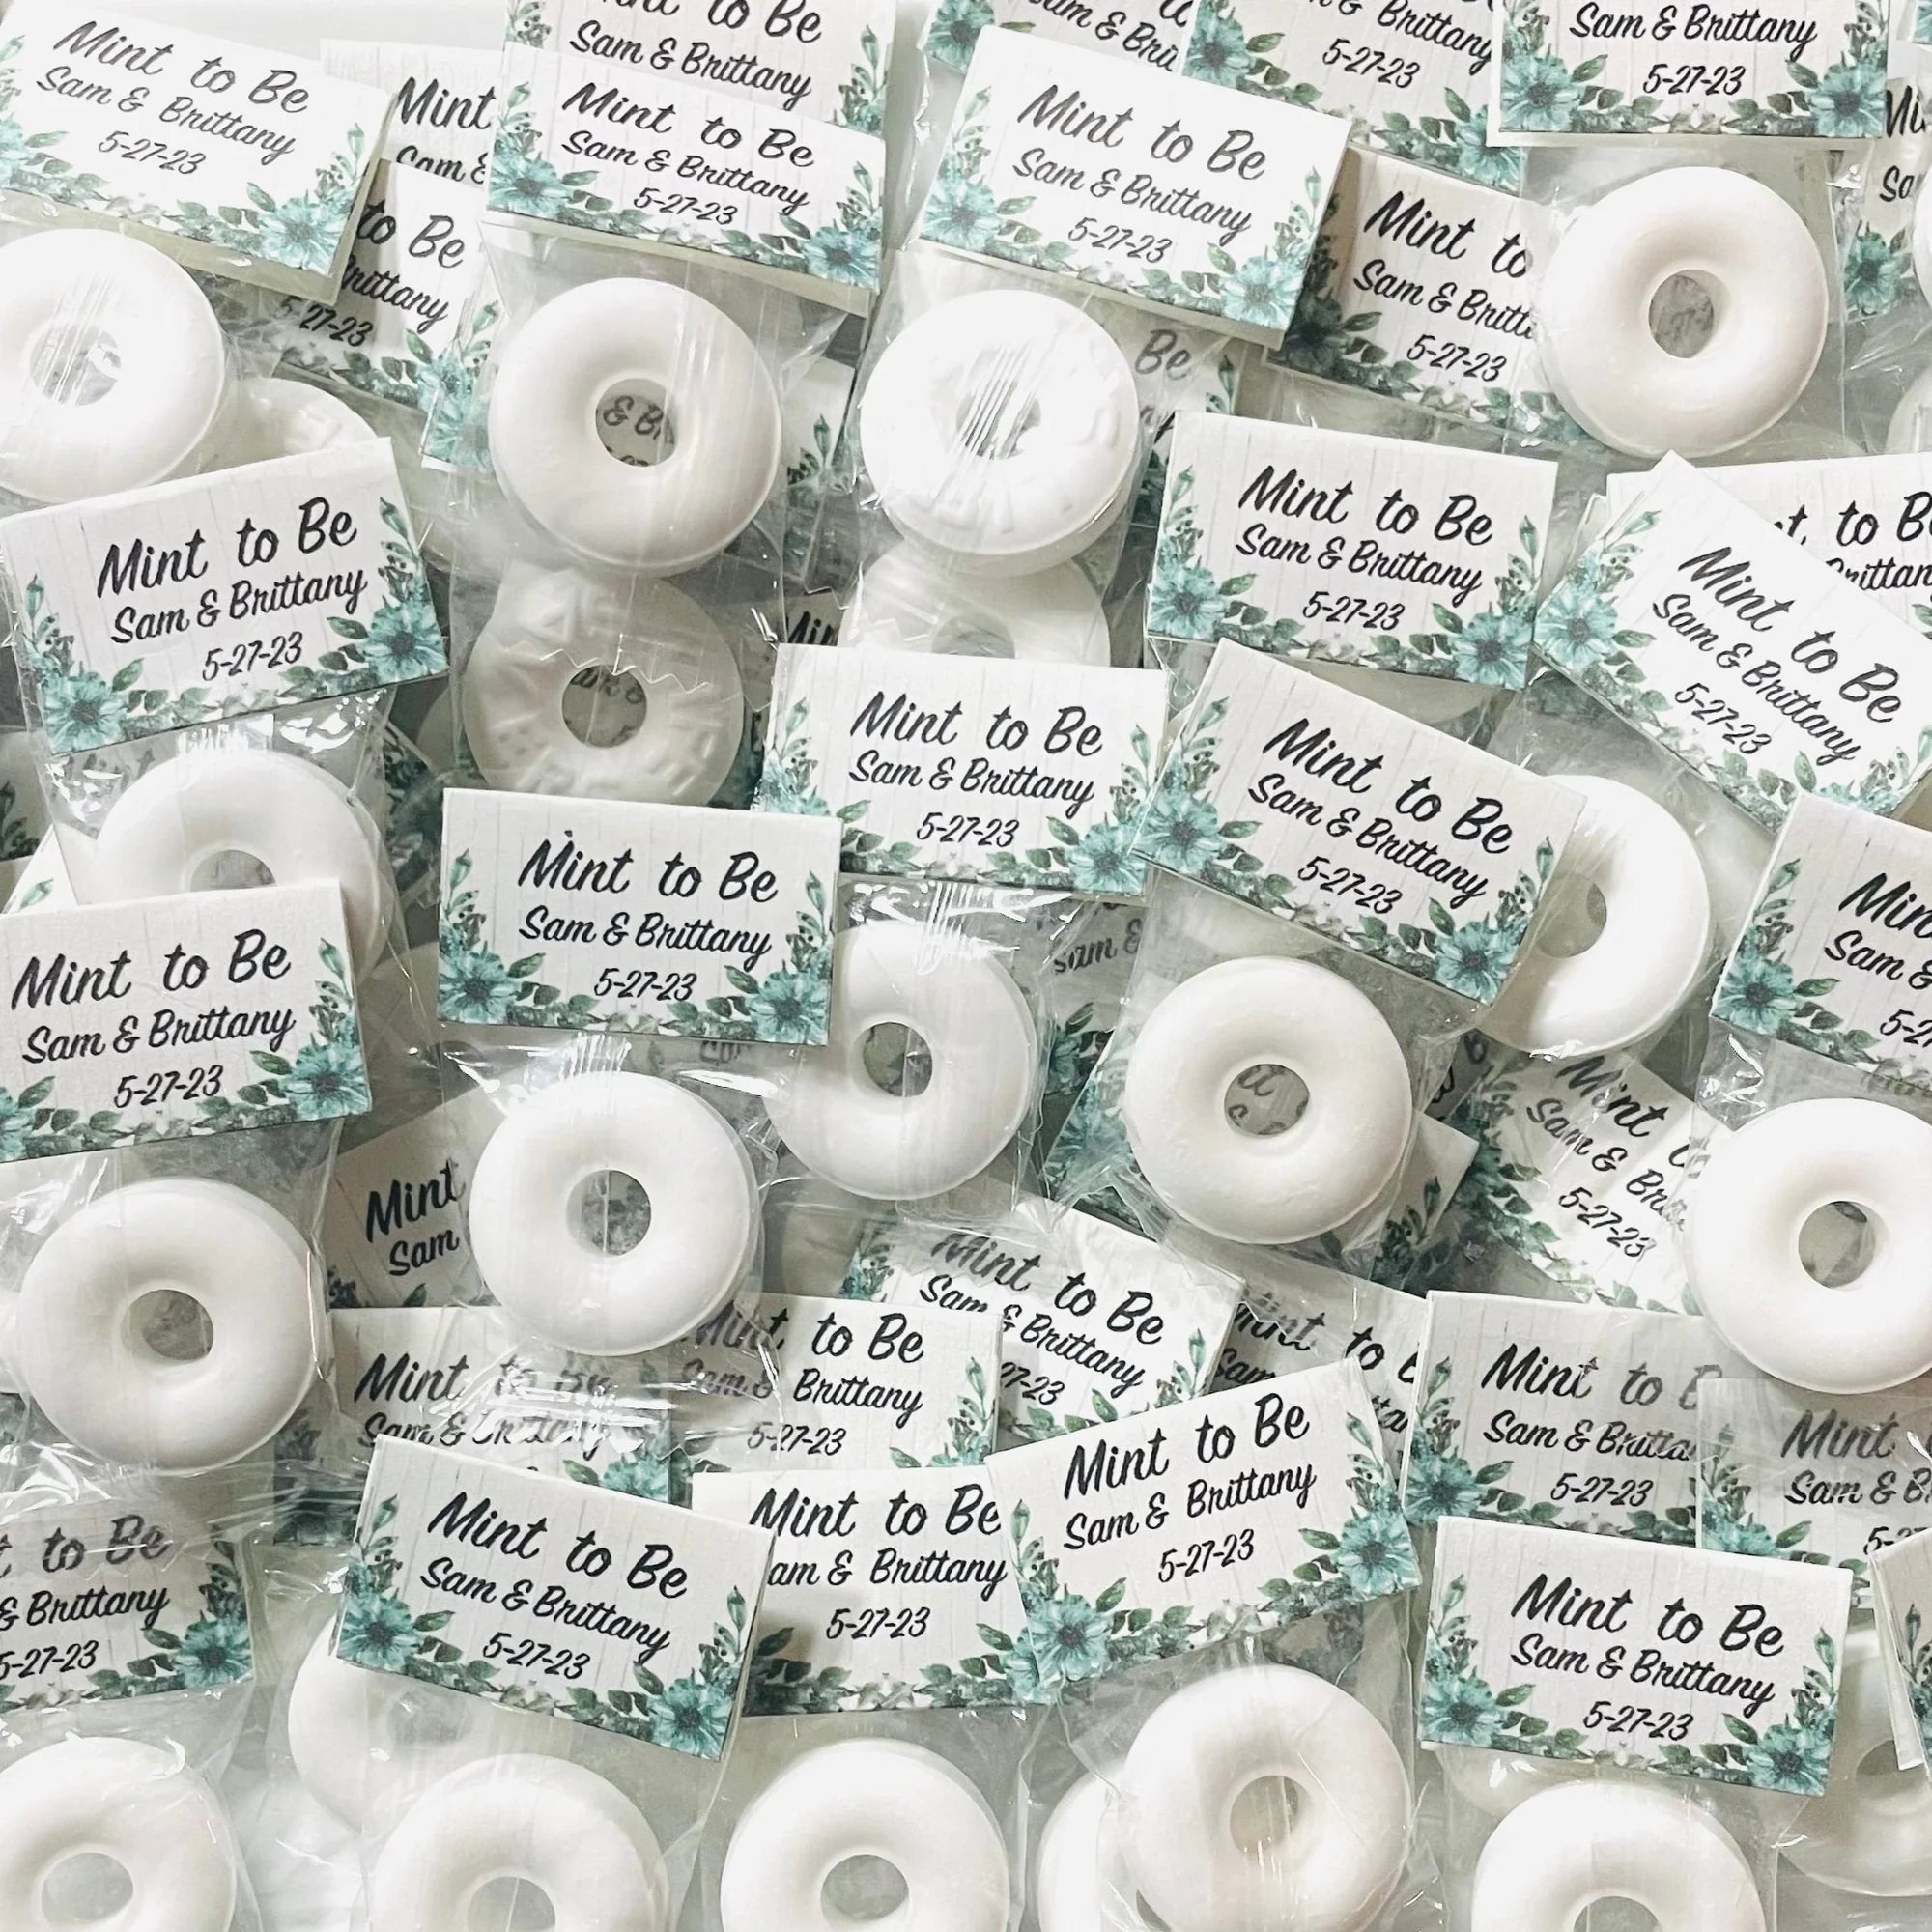 16 of The Best Wedding Favor Ideas for Every Budget